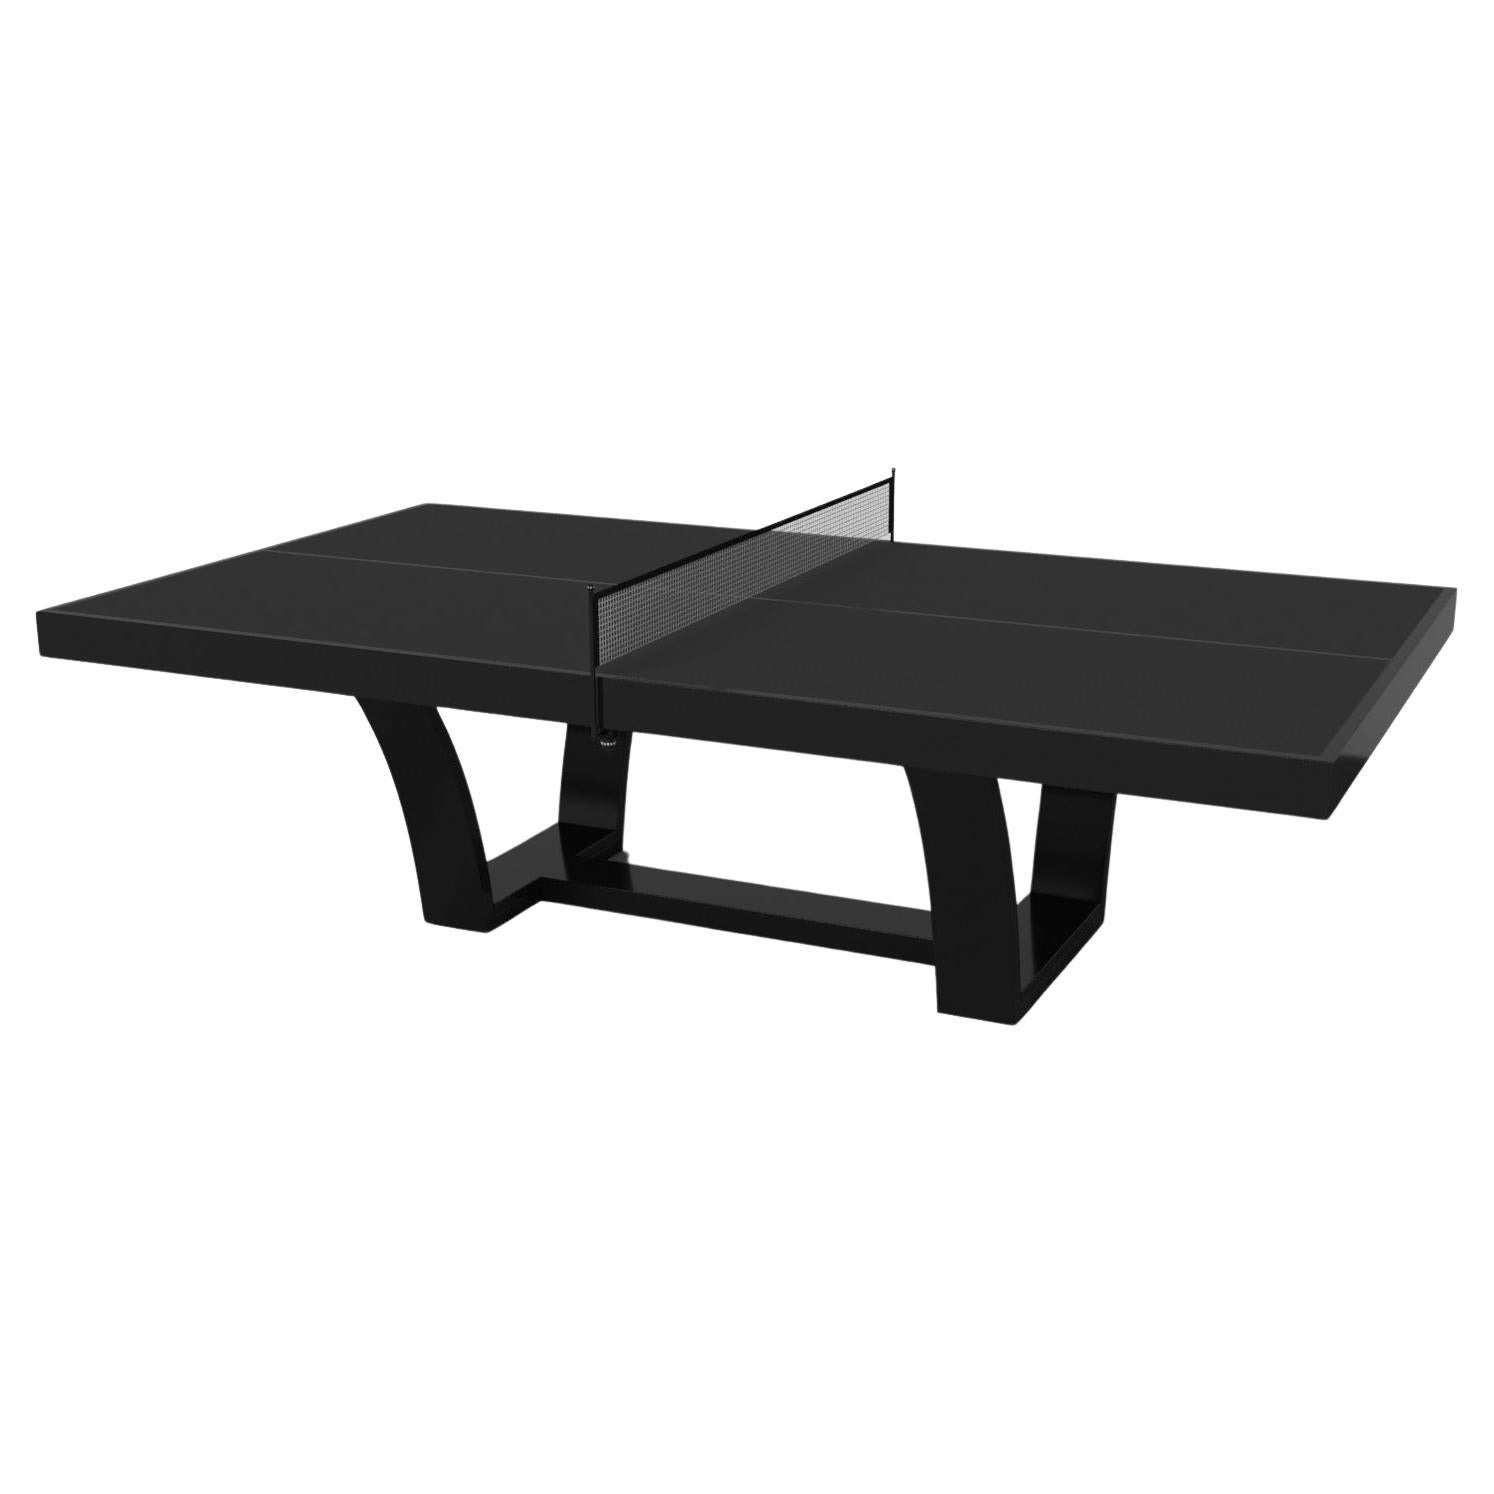 Elevate Customs Elite Tennis Table /Solid Pantone Black Color in 9' -Made in USA For Sale